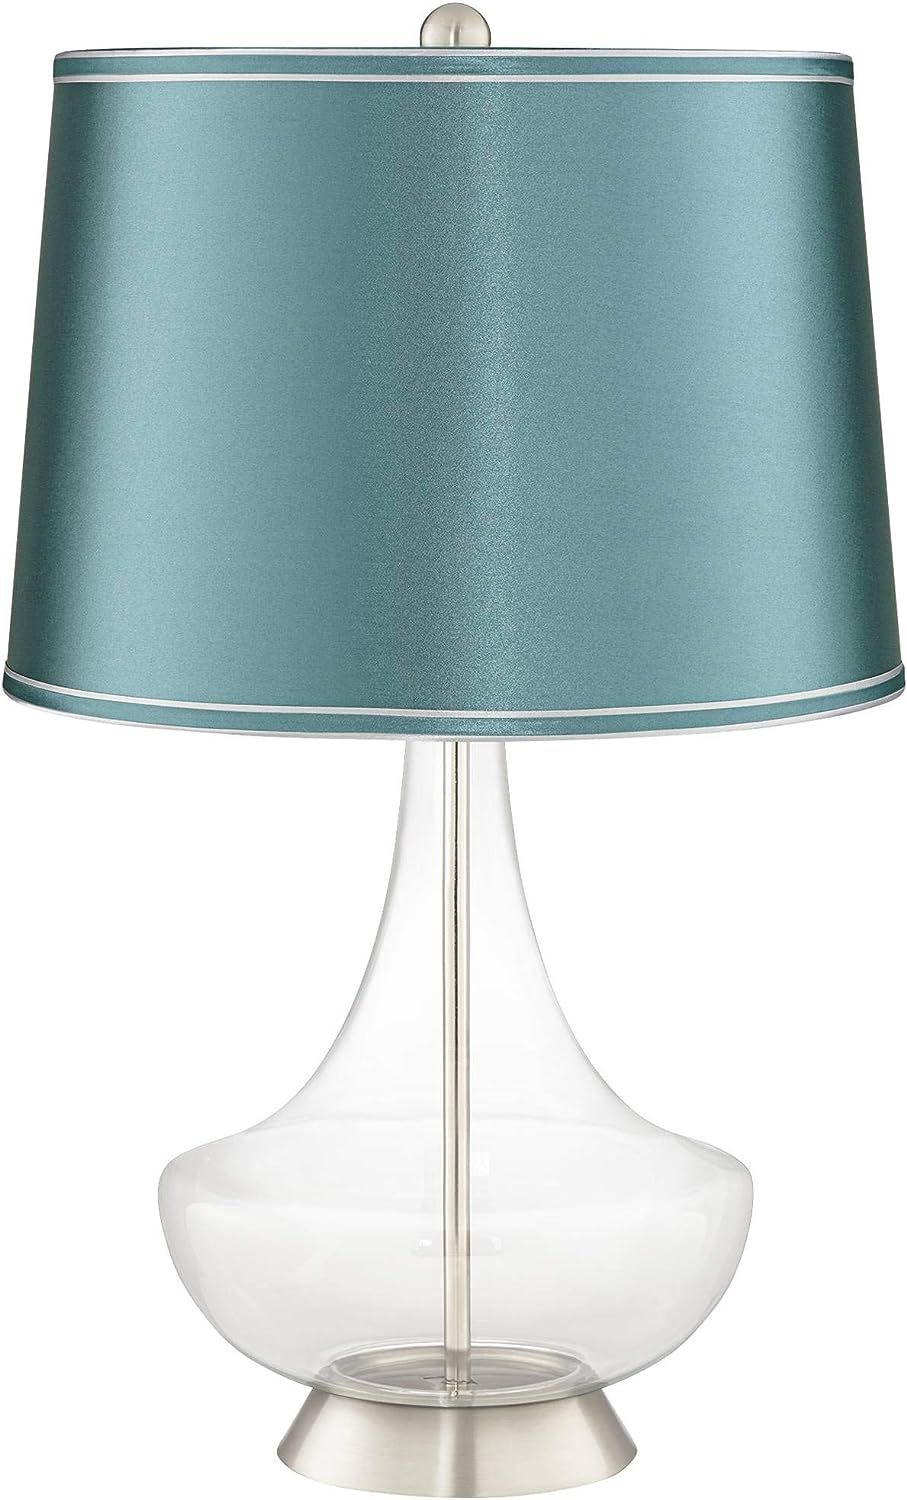 Clear Glass Fillable Teal Satin Shade Gillan Table Lamp - Color + Plus | Amazon (US)